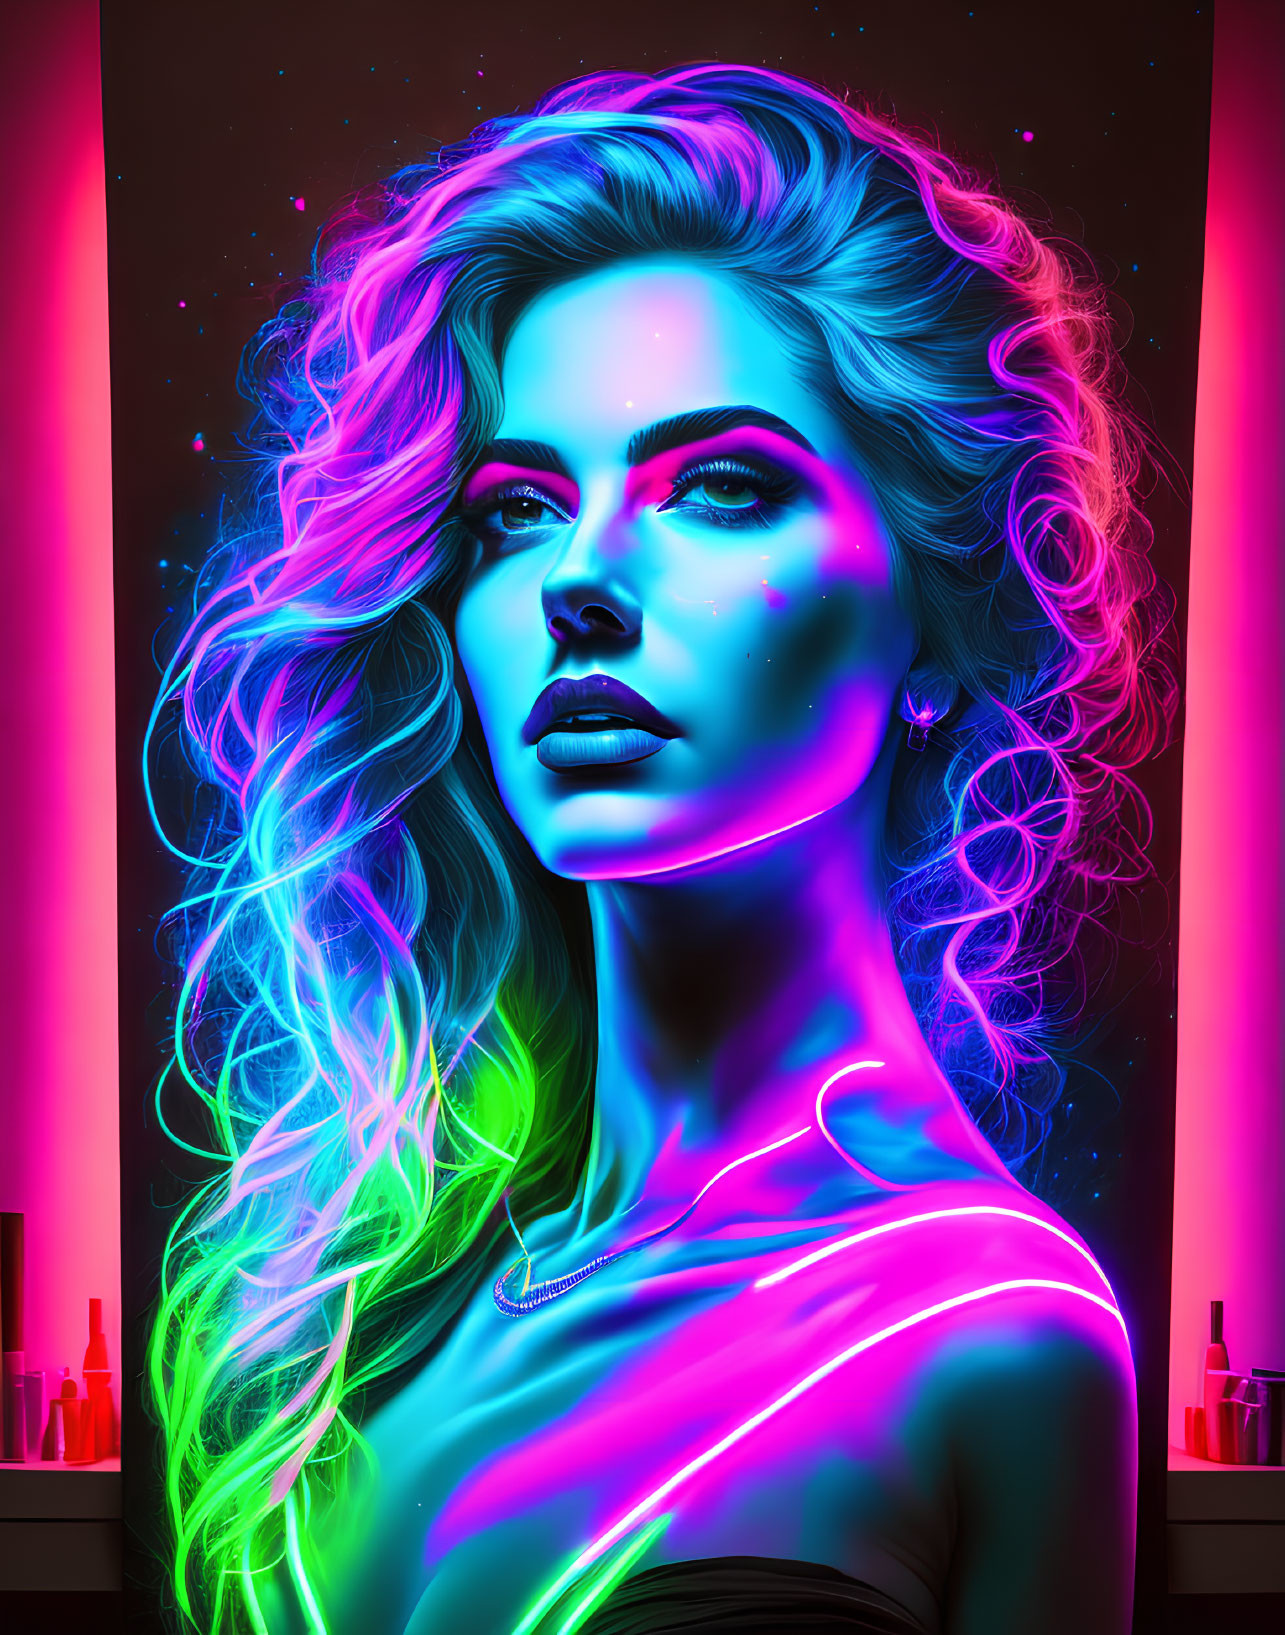 Colorful digital artwork: Neon-lit woman with vibrant skin tones on dark background